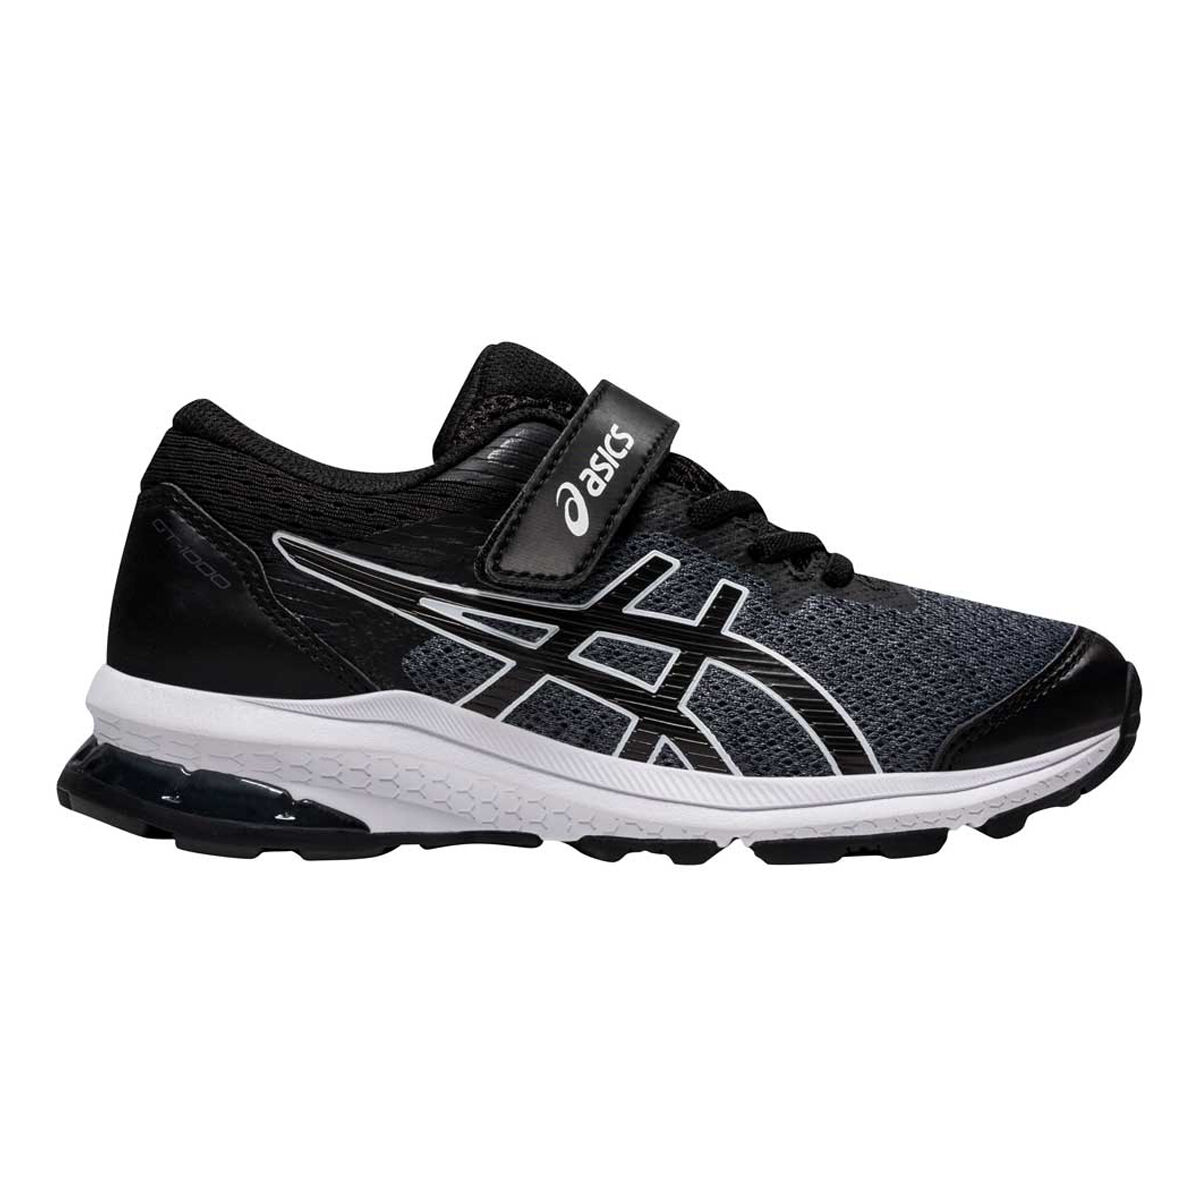 asics shoes clearance sale